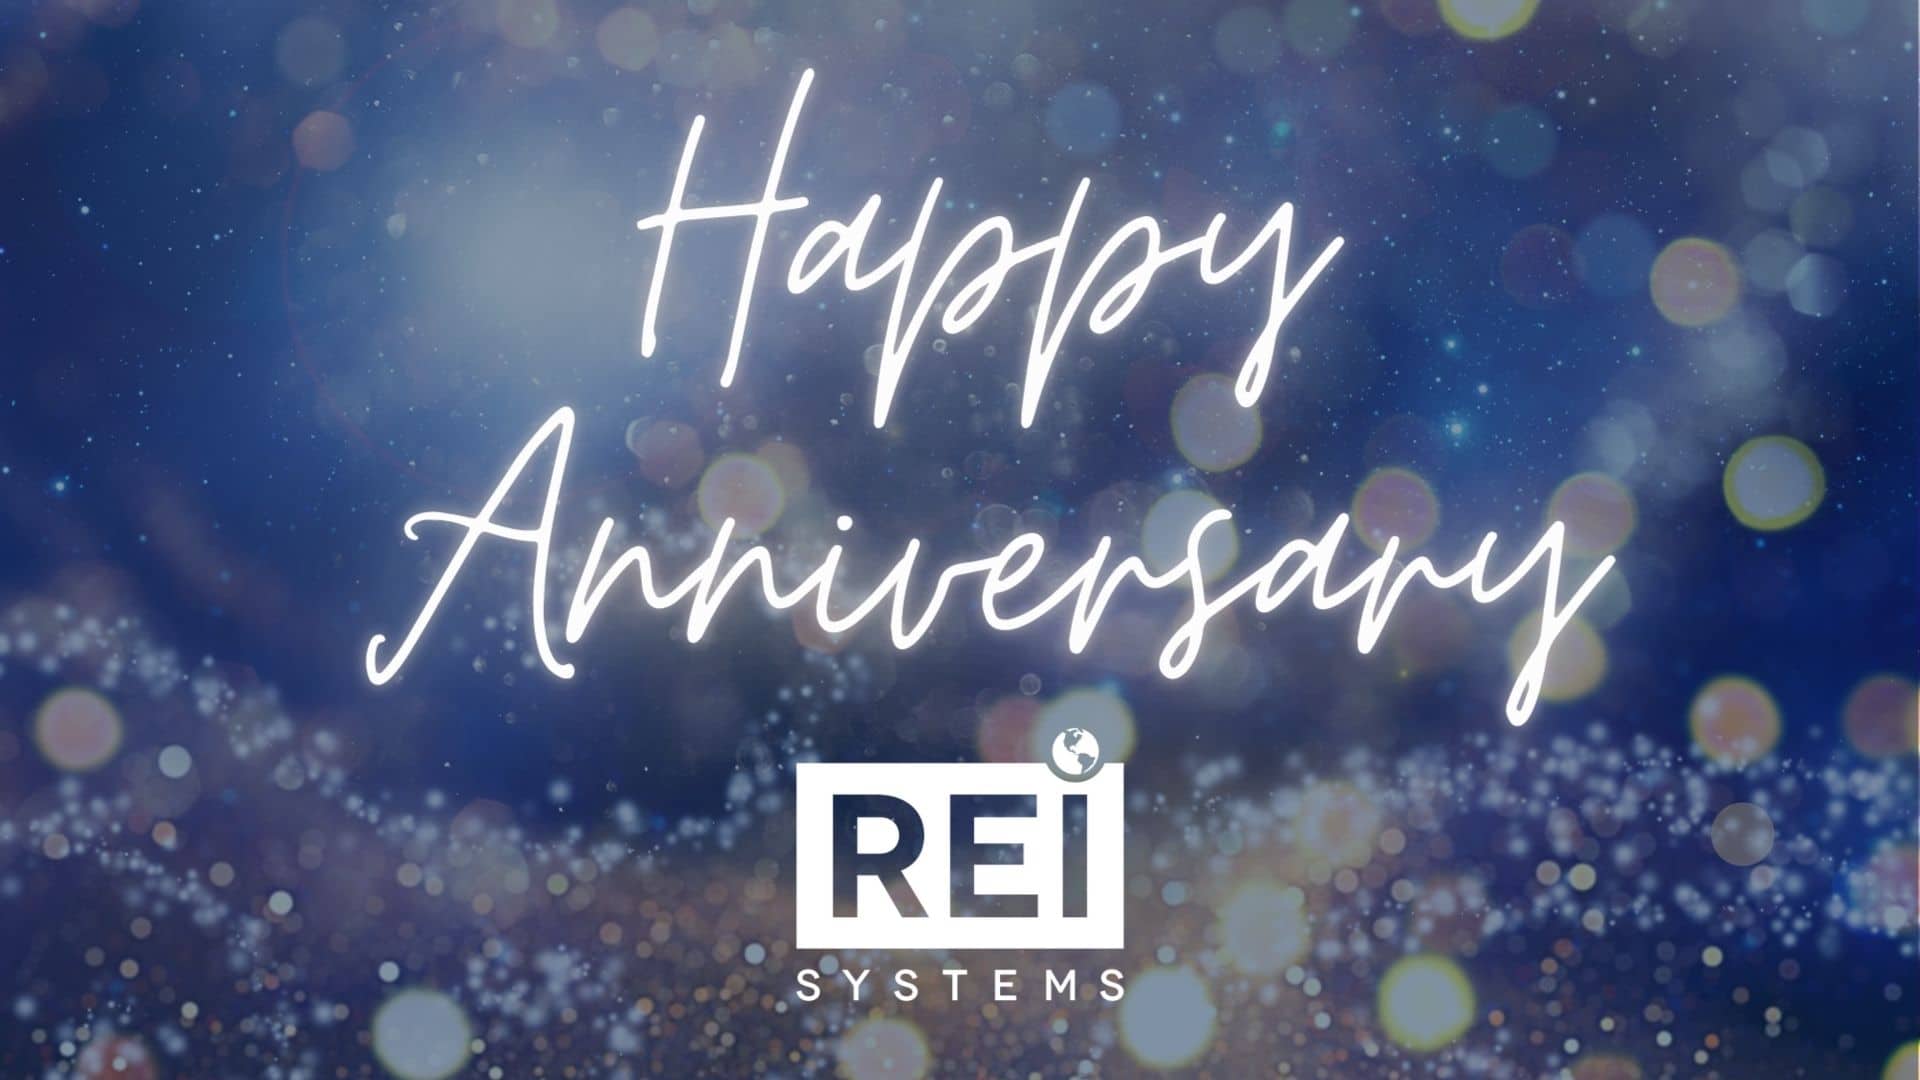 REI Systems Celebrates 31 Years with Gratitude!